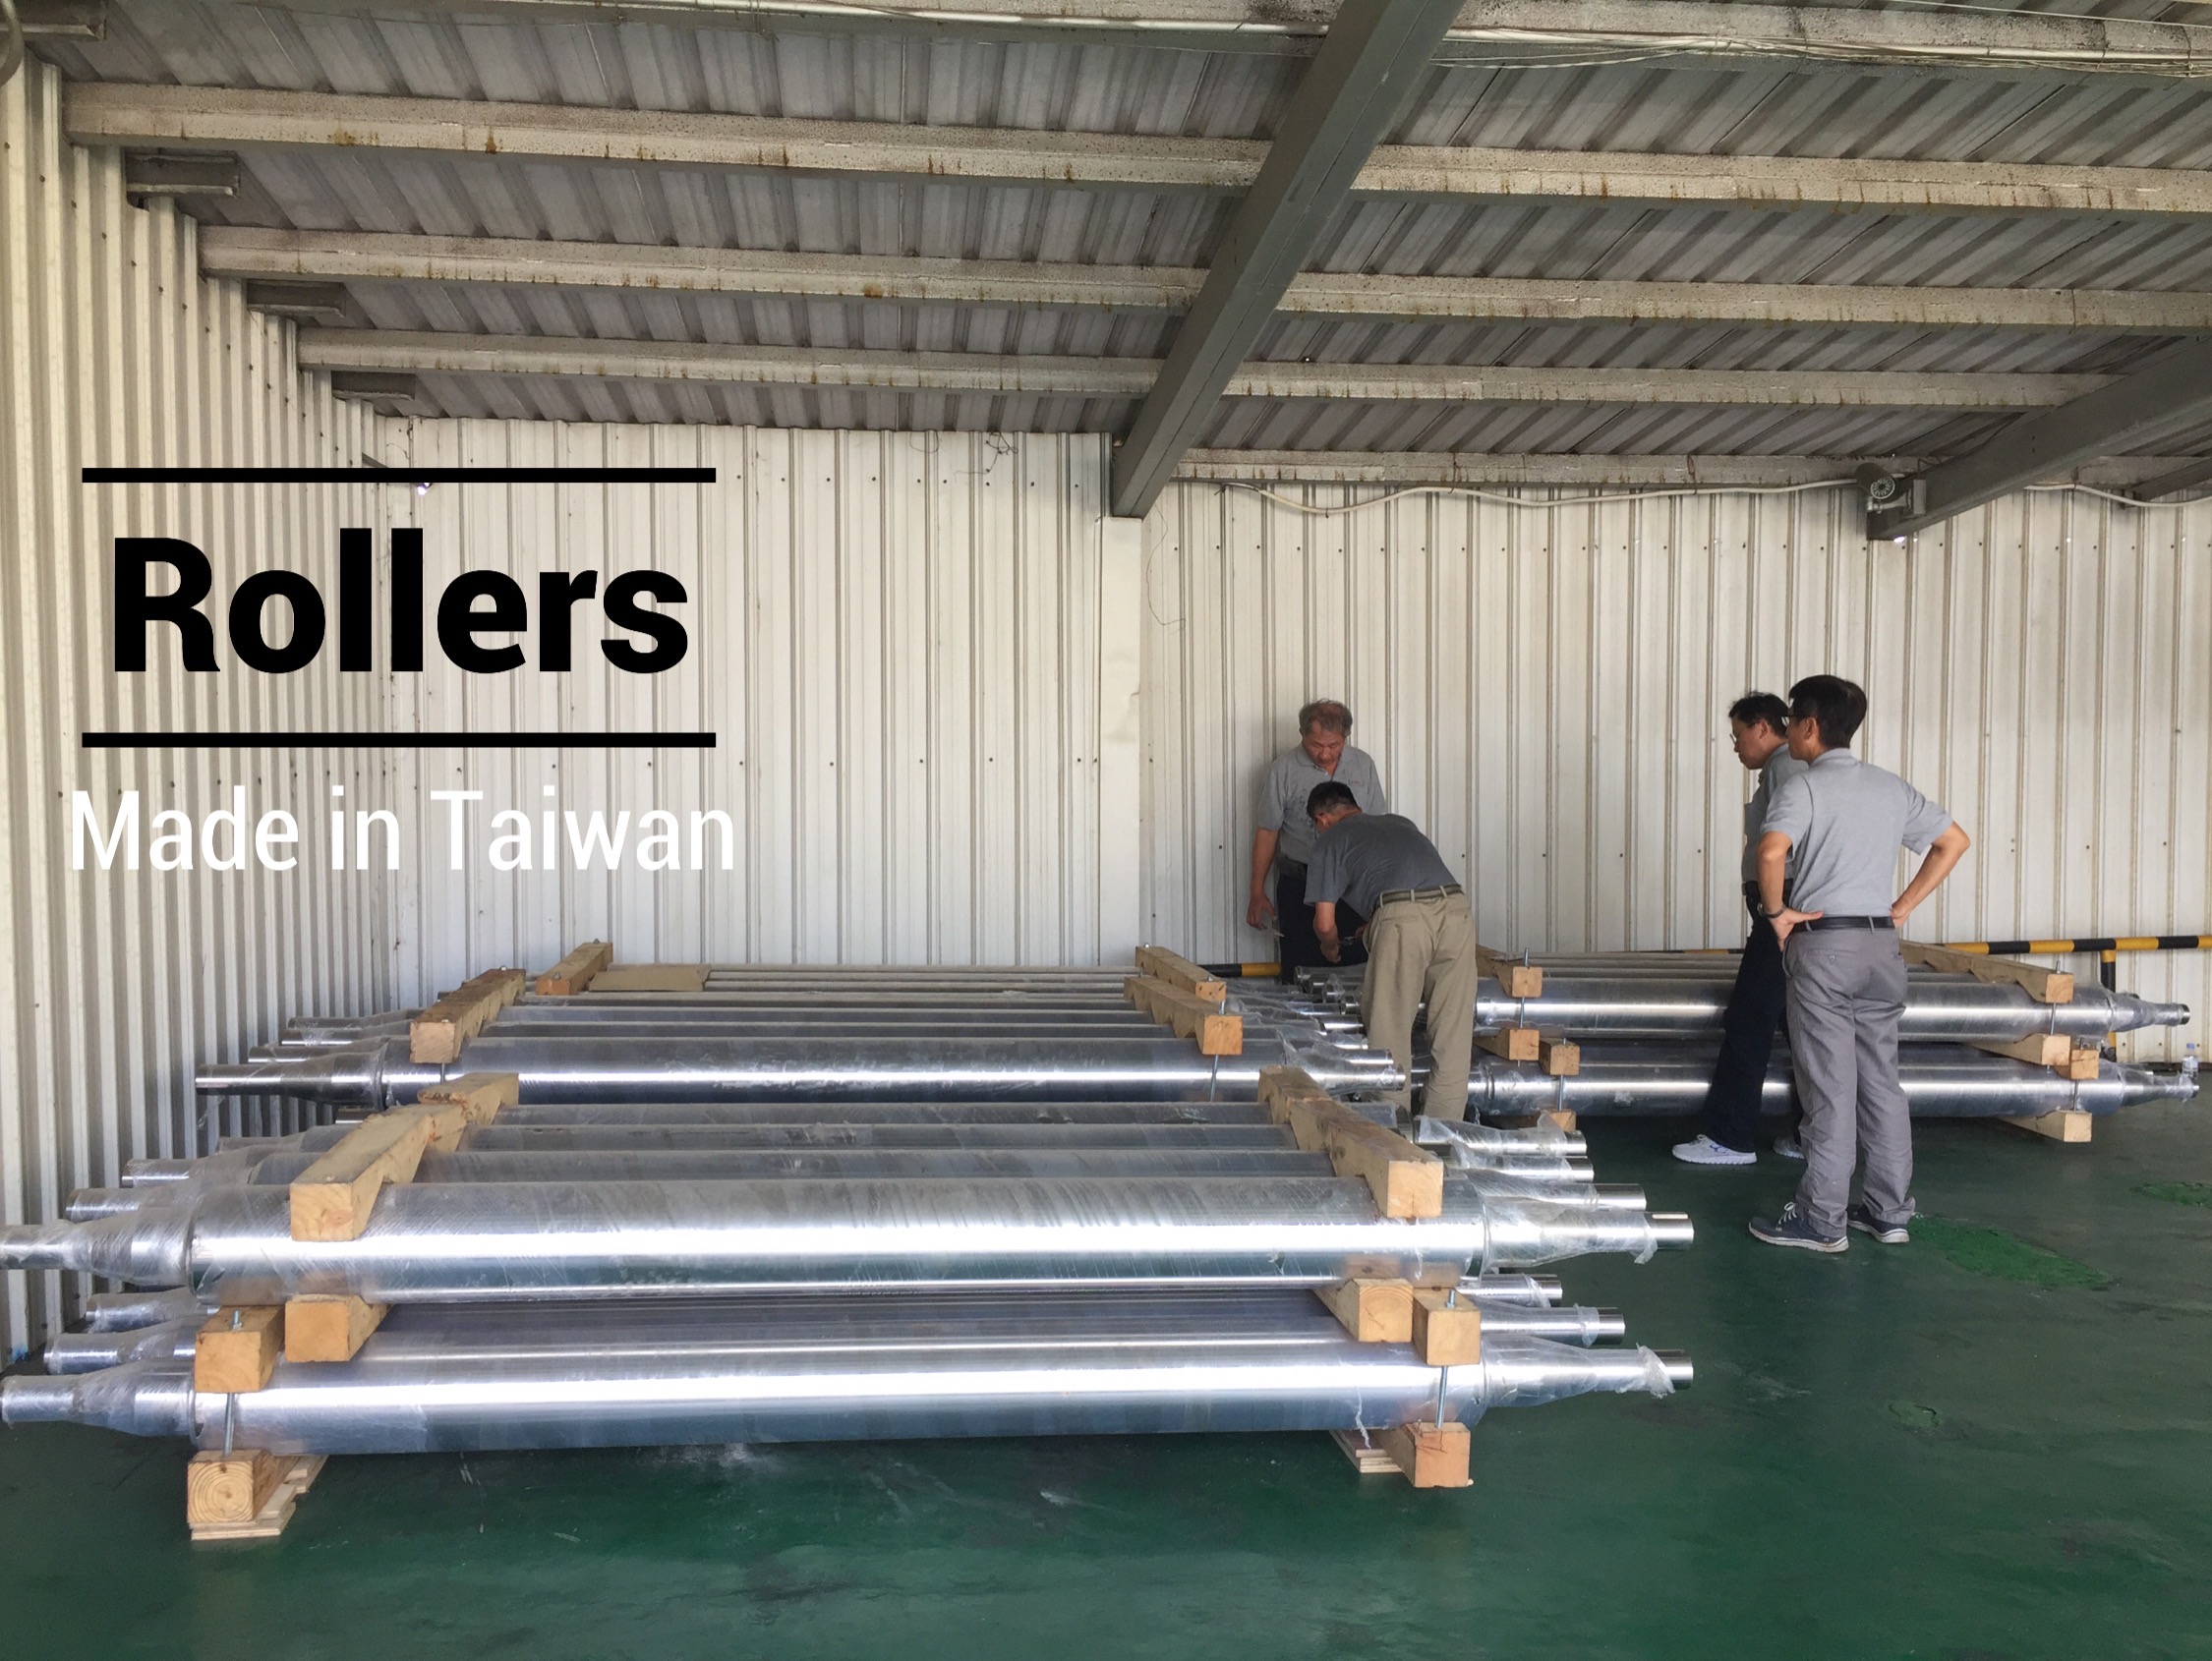 Stainless steel roller derived from stainless steel tube